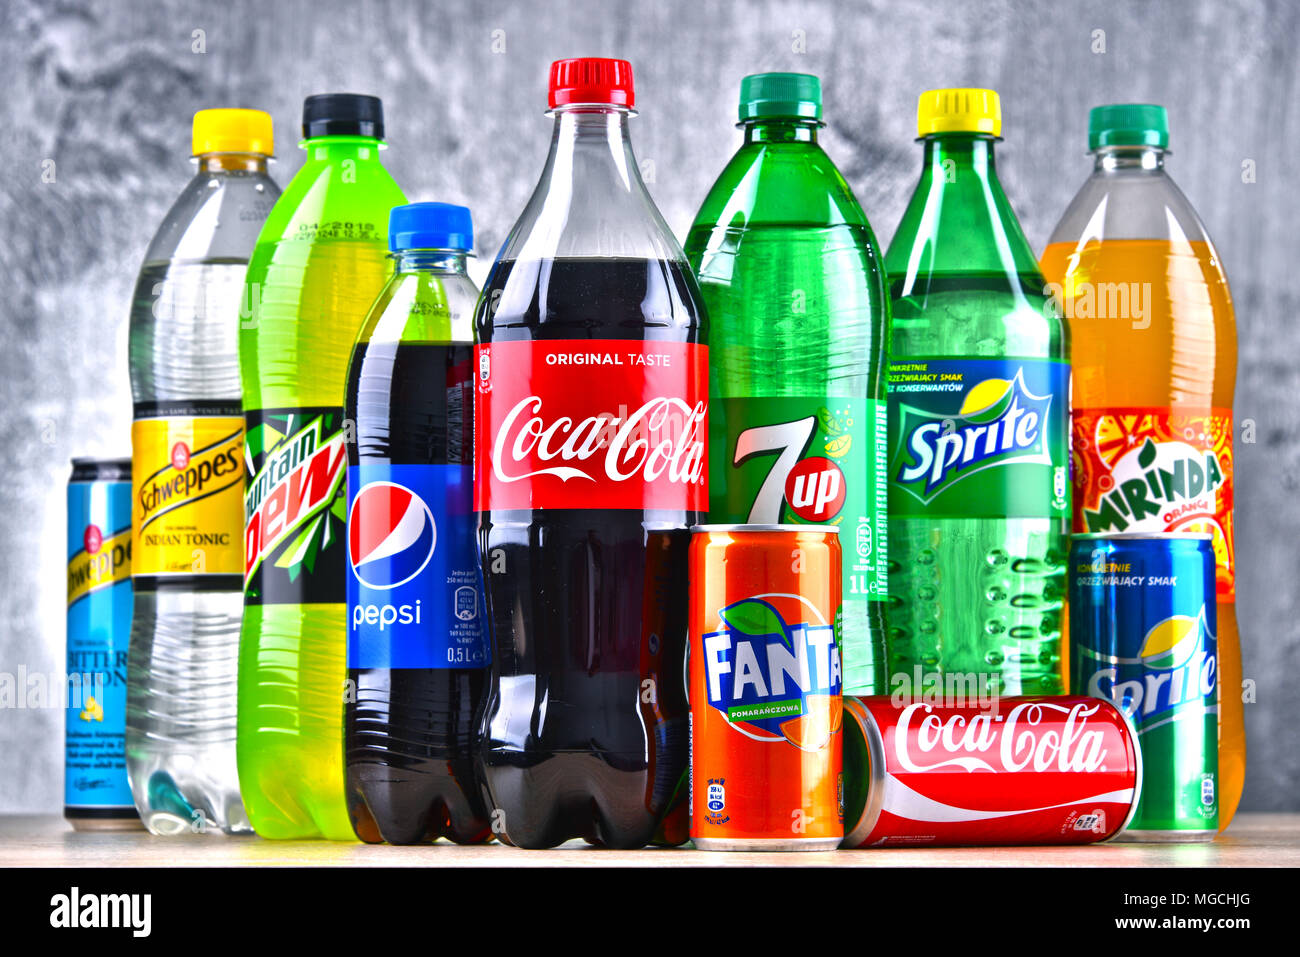 POZNAN, POLAND - APR 6, 2018: Bottles of global soft drink brands including products of Coca Cola Company and Pepsico Stock Photo